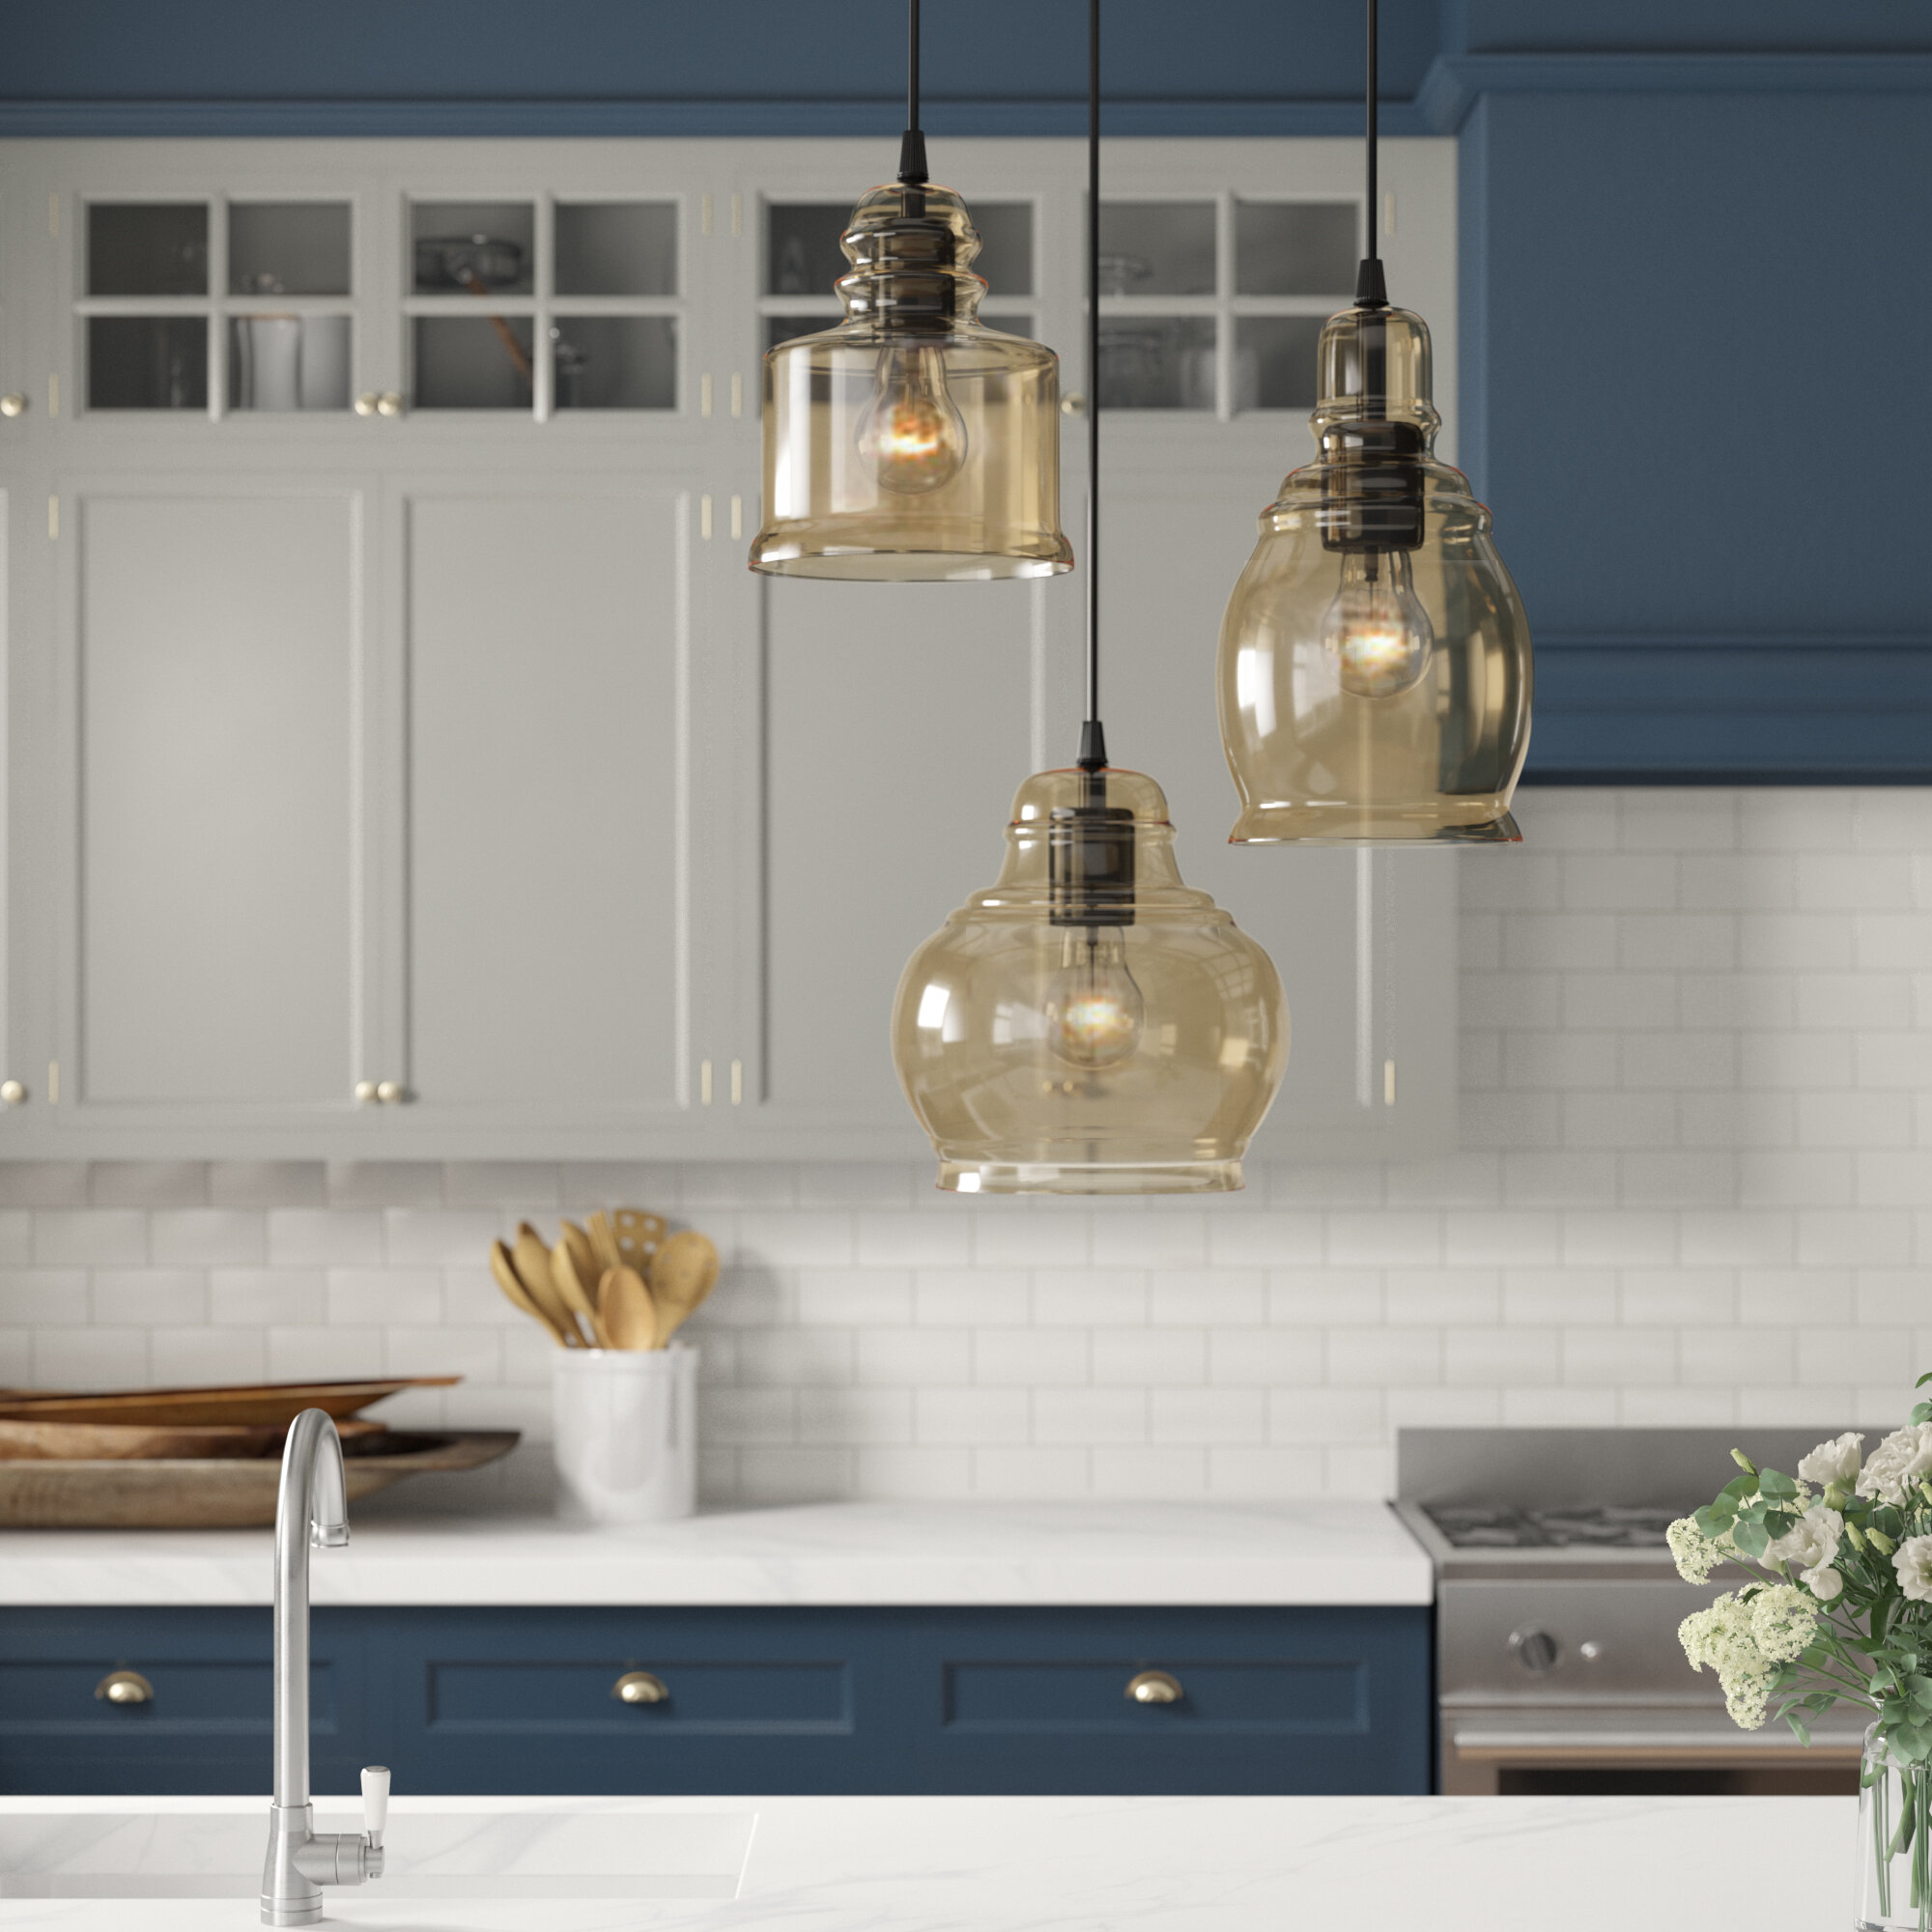 Kitchen Accessories Shopping Guide: Gold & Brass by Albie Knows